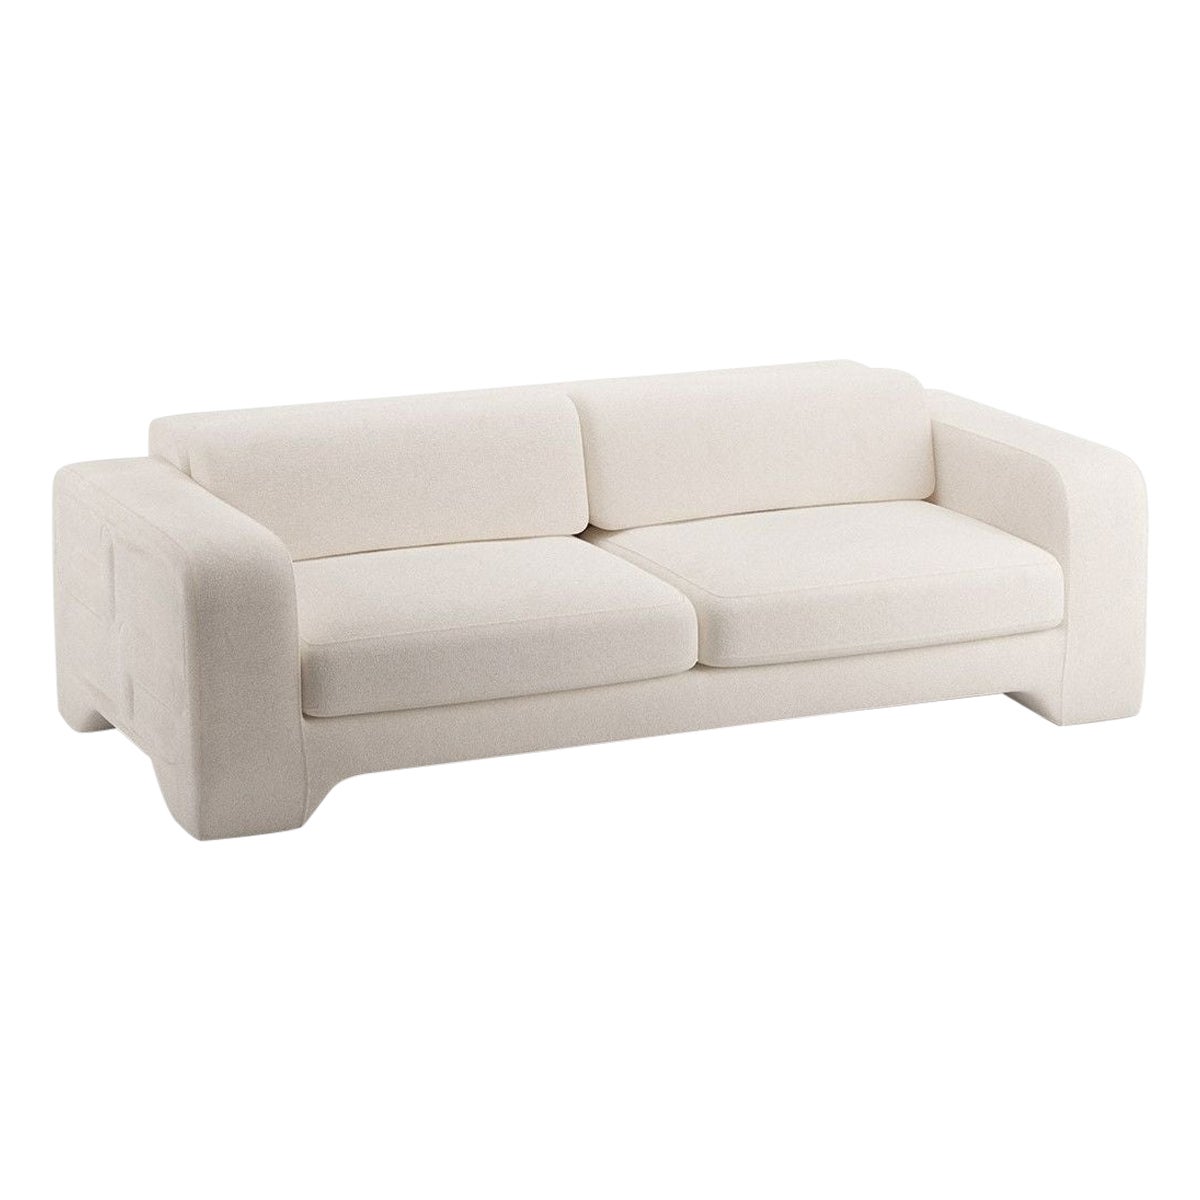 Popus Editions Giovanna 4 Seater Sofa in Macadamia London Linen Fabric For Sale